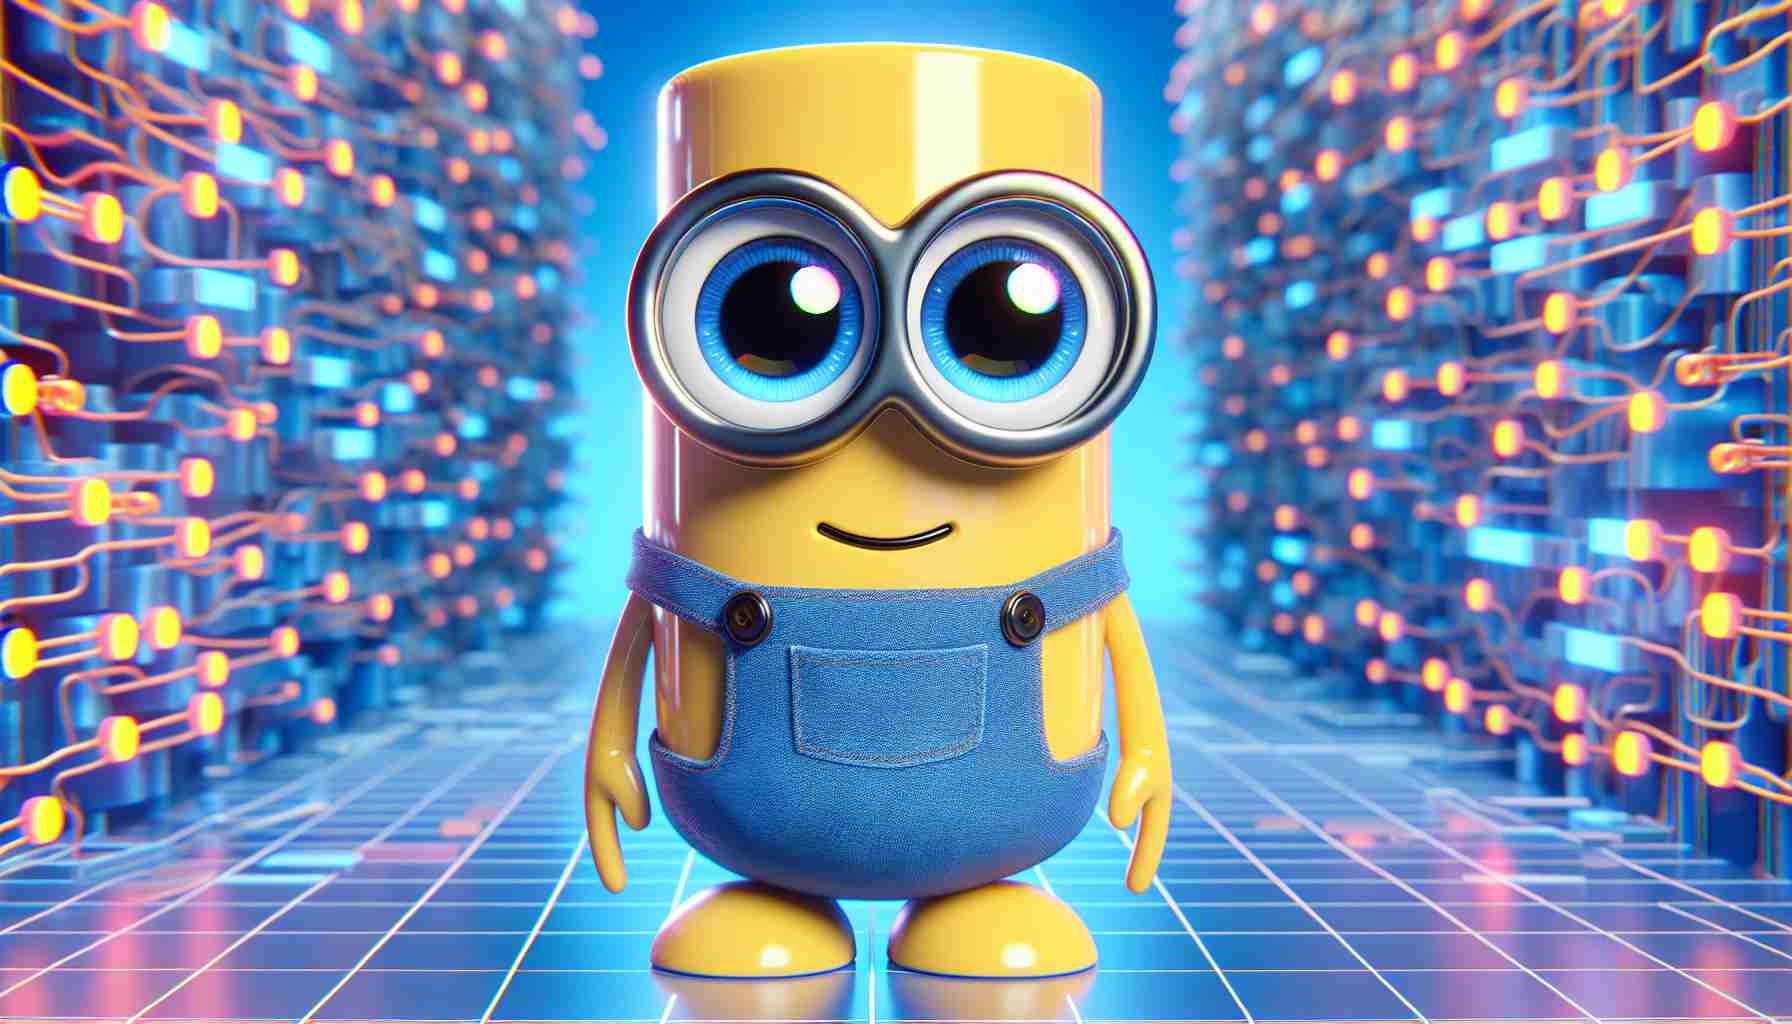 The Impact of Artificial Intelligence on Animation: A Minion’s Perspective